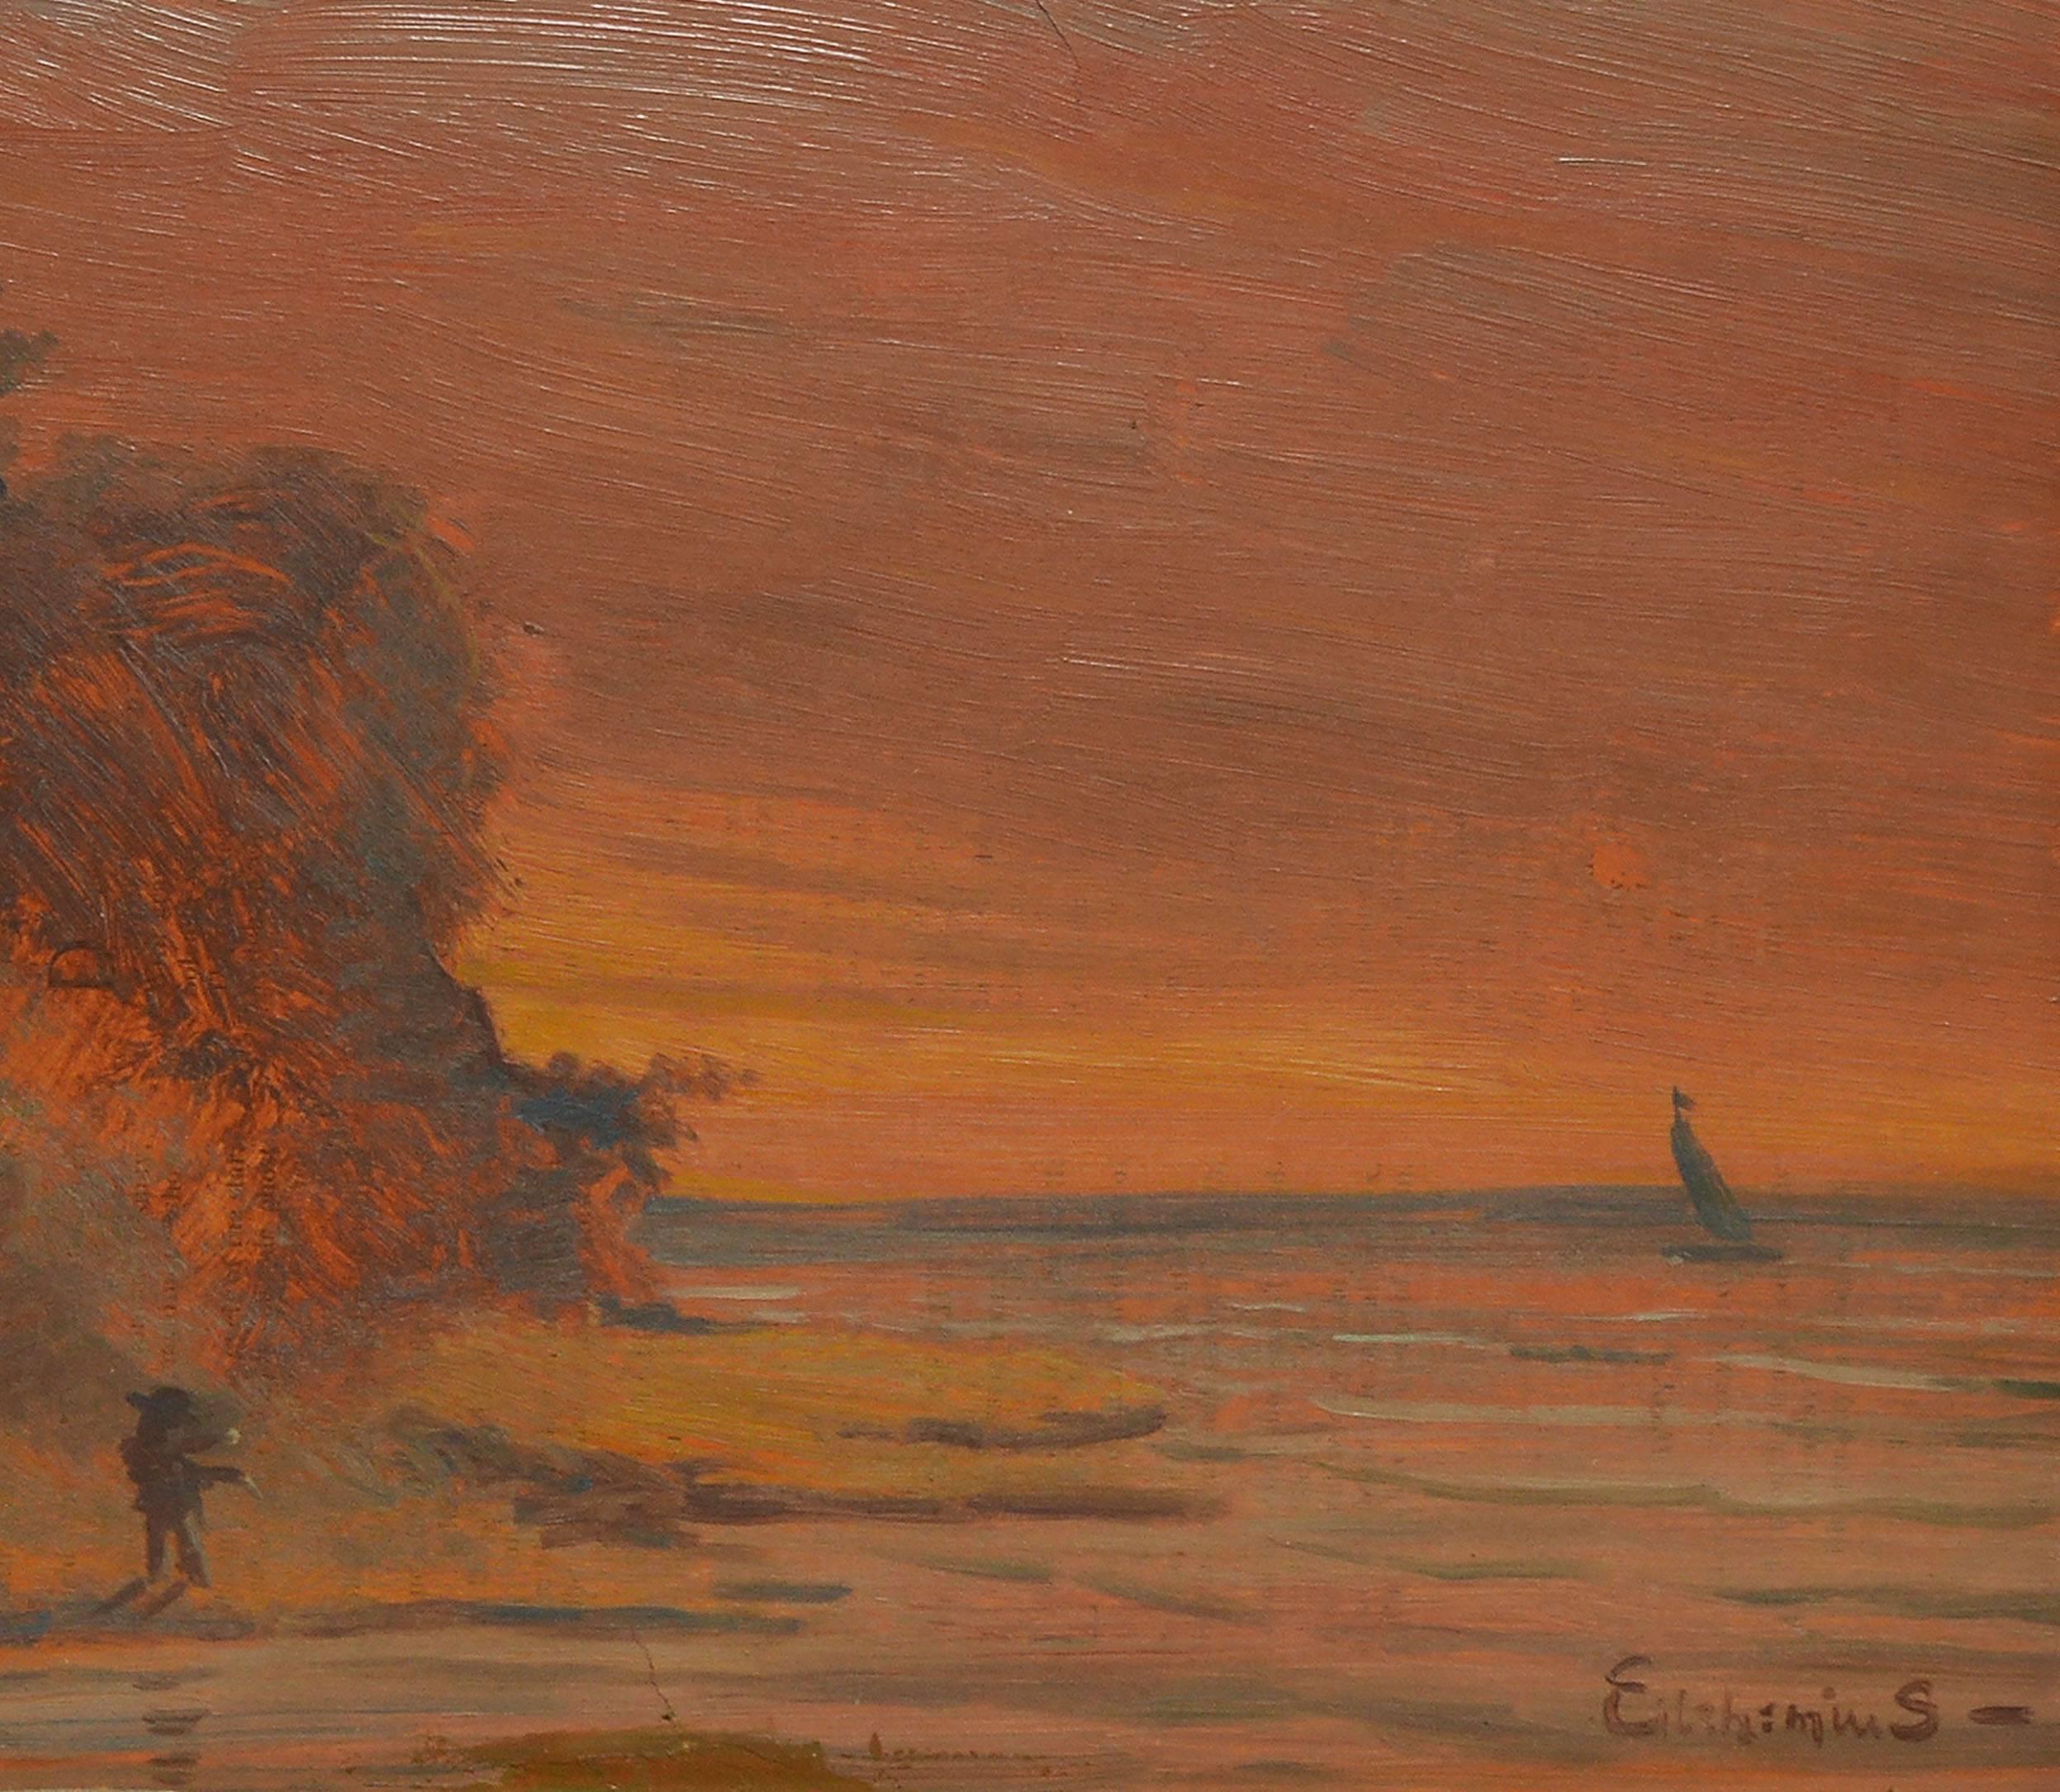 Painting the Sunset Sail - Brown Landscape Painting by Louis Michel Eilshemius